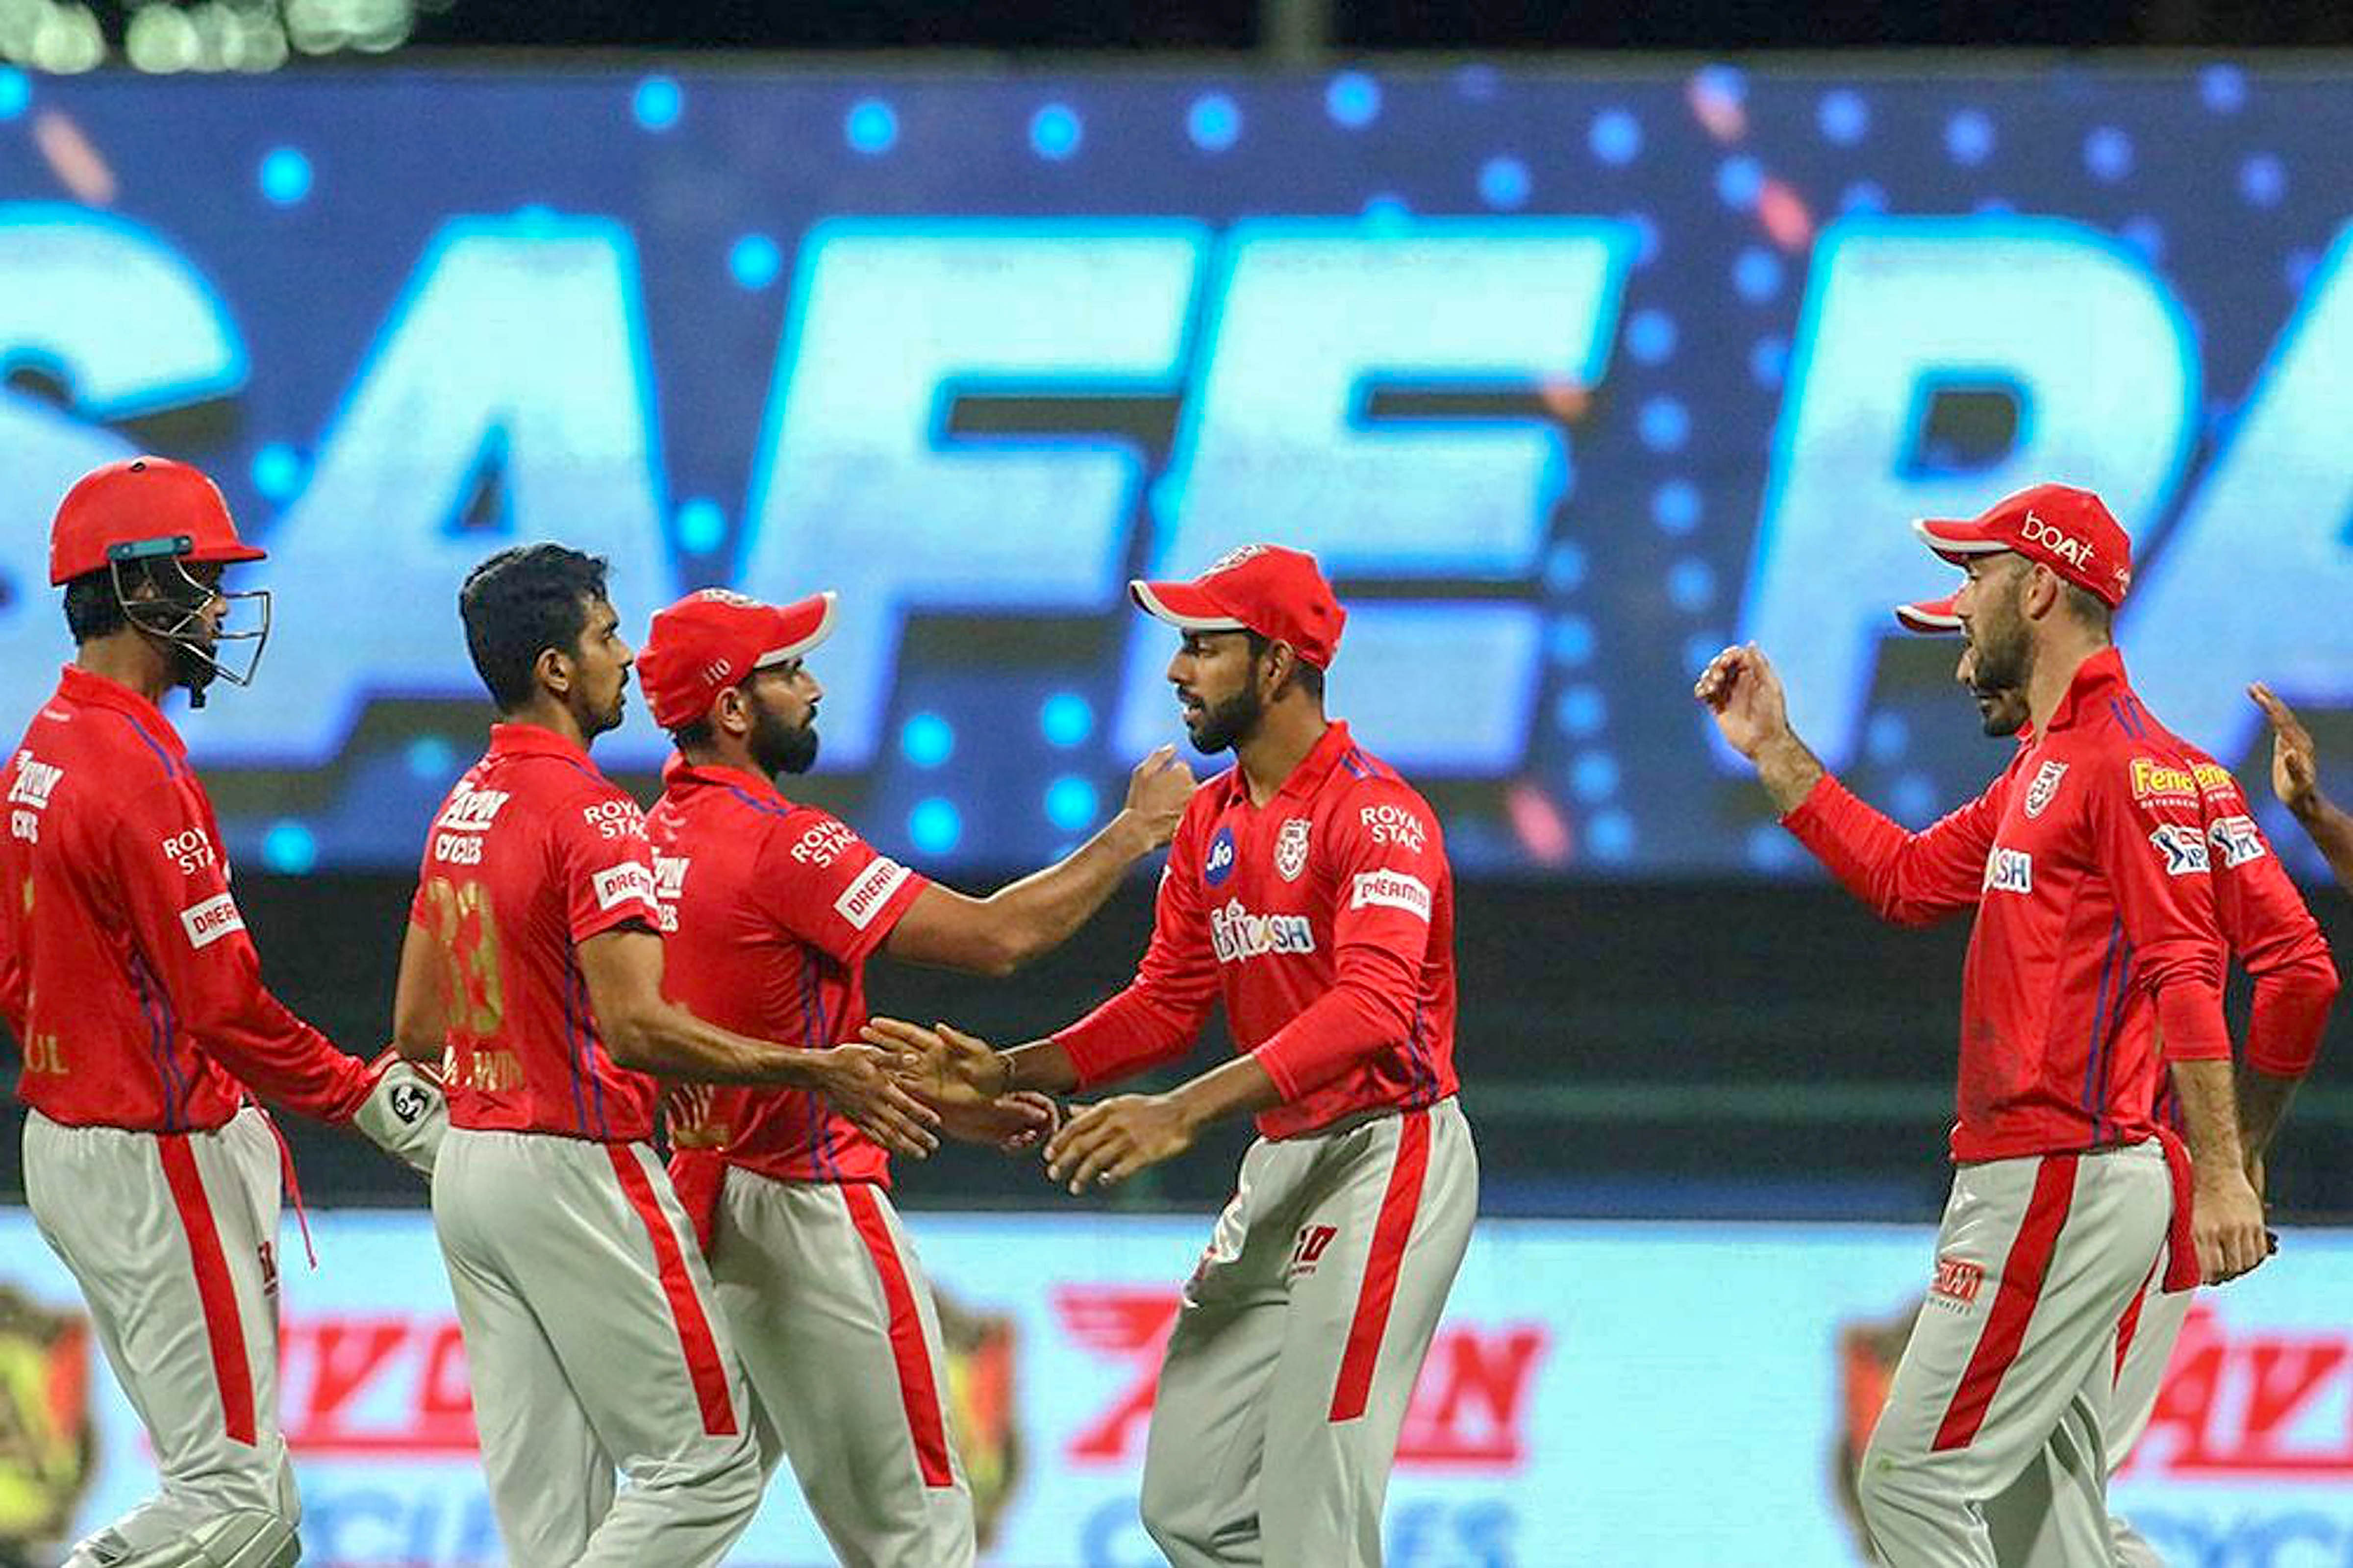 Kings XI Punjab players celebrates the wicket of Robin Uthappa of Rajasthan Royals during the Indian Premier League (IPL) cricket match at the Sheikh Zayed Stadium. Credits: PTI Photo